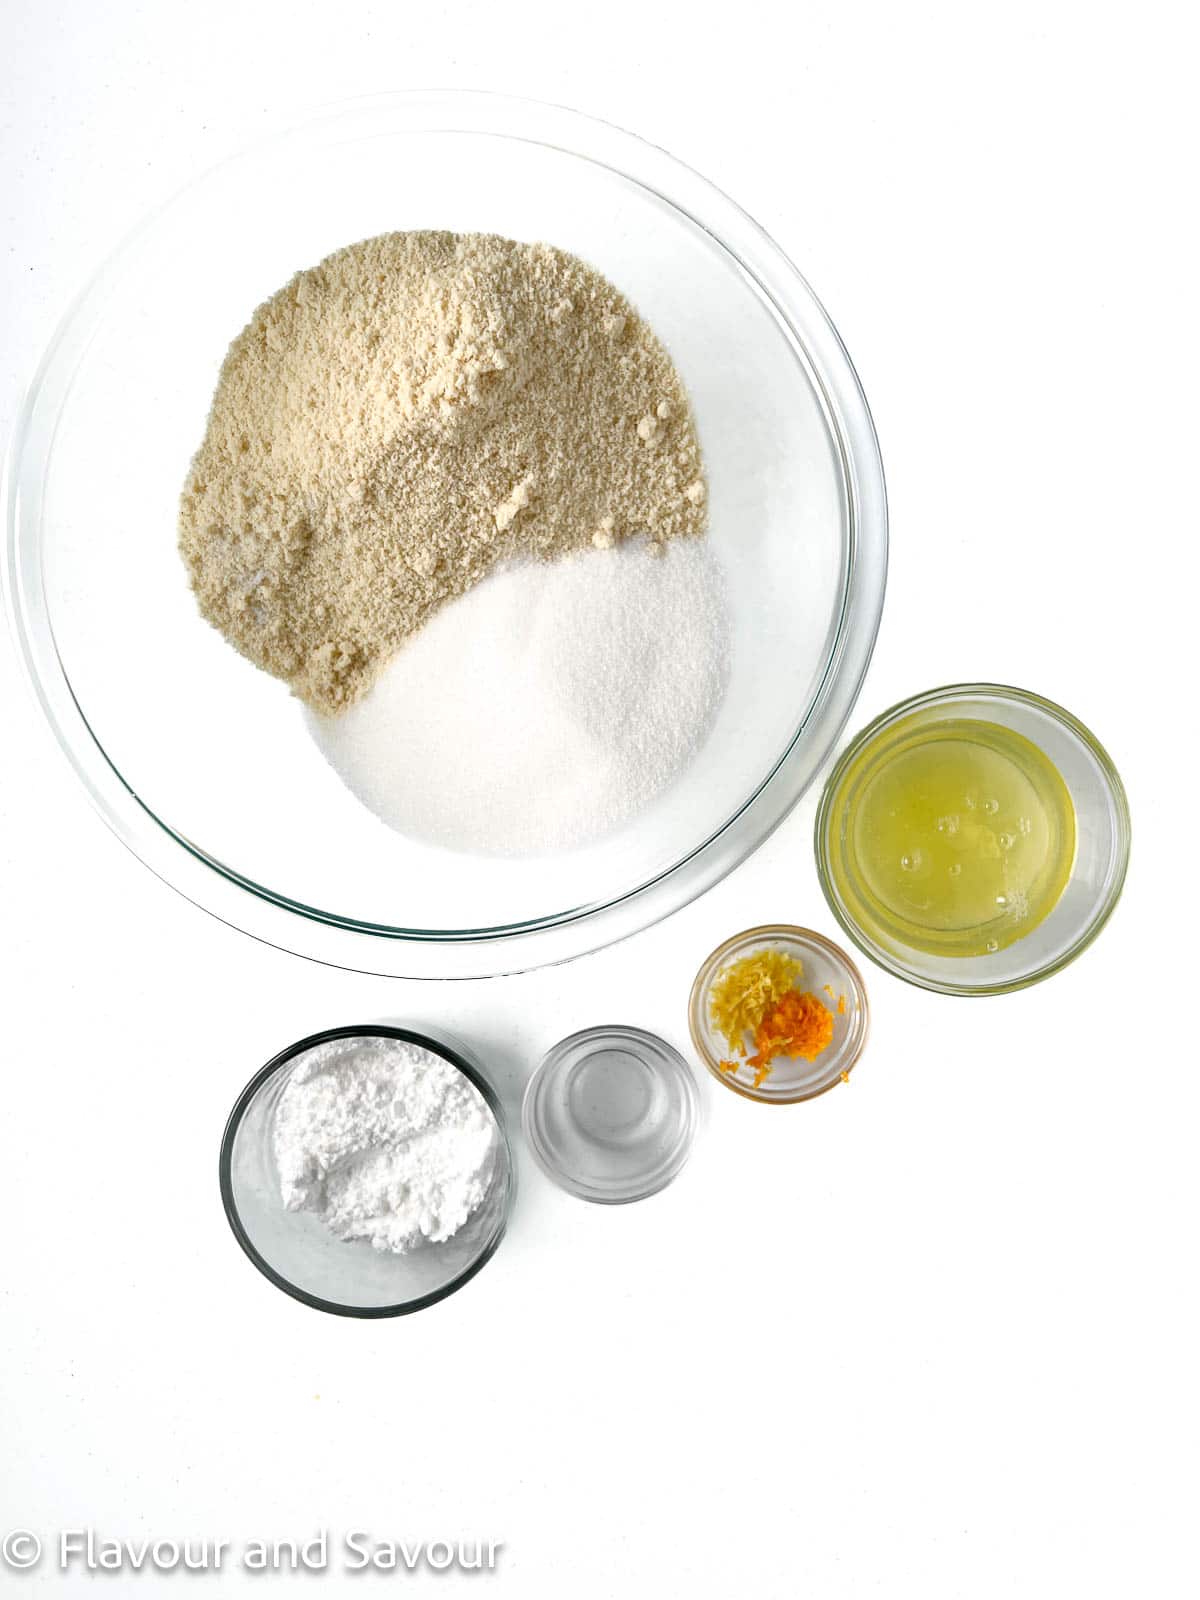 Ingredients for Italian almond cookies: almond flour, sugar, salt, egg whites, lemon and orange zest, almond extract, and confectioner's sugar.